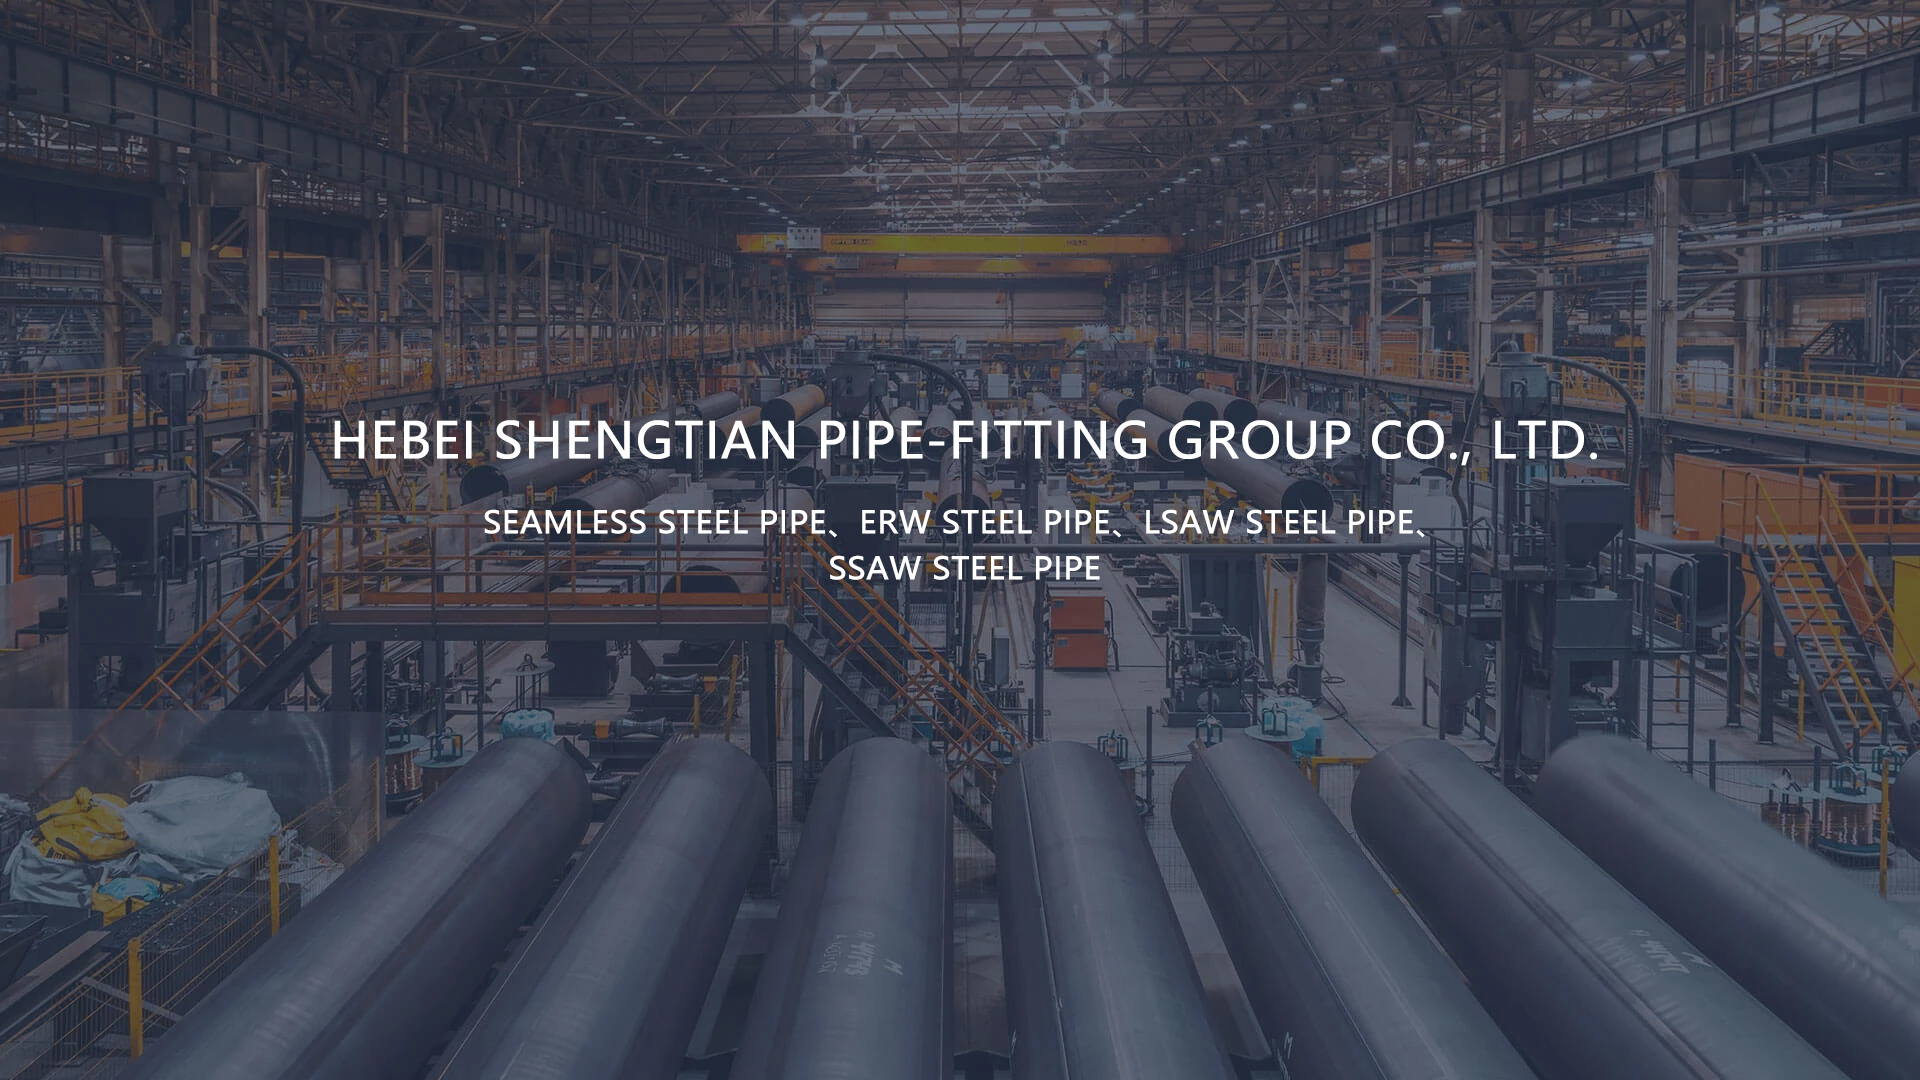 seamless steel pipe, erw steel pipe, lsaw steel pipe, ssaw steel pipe